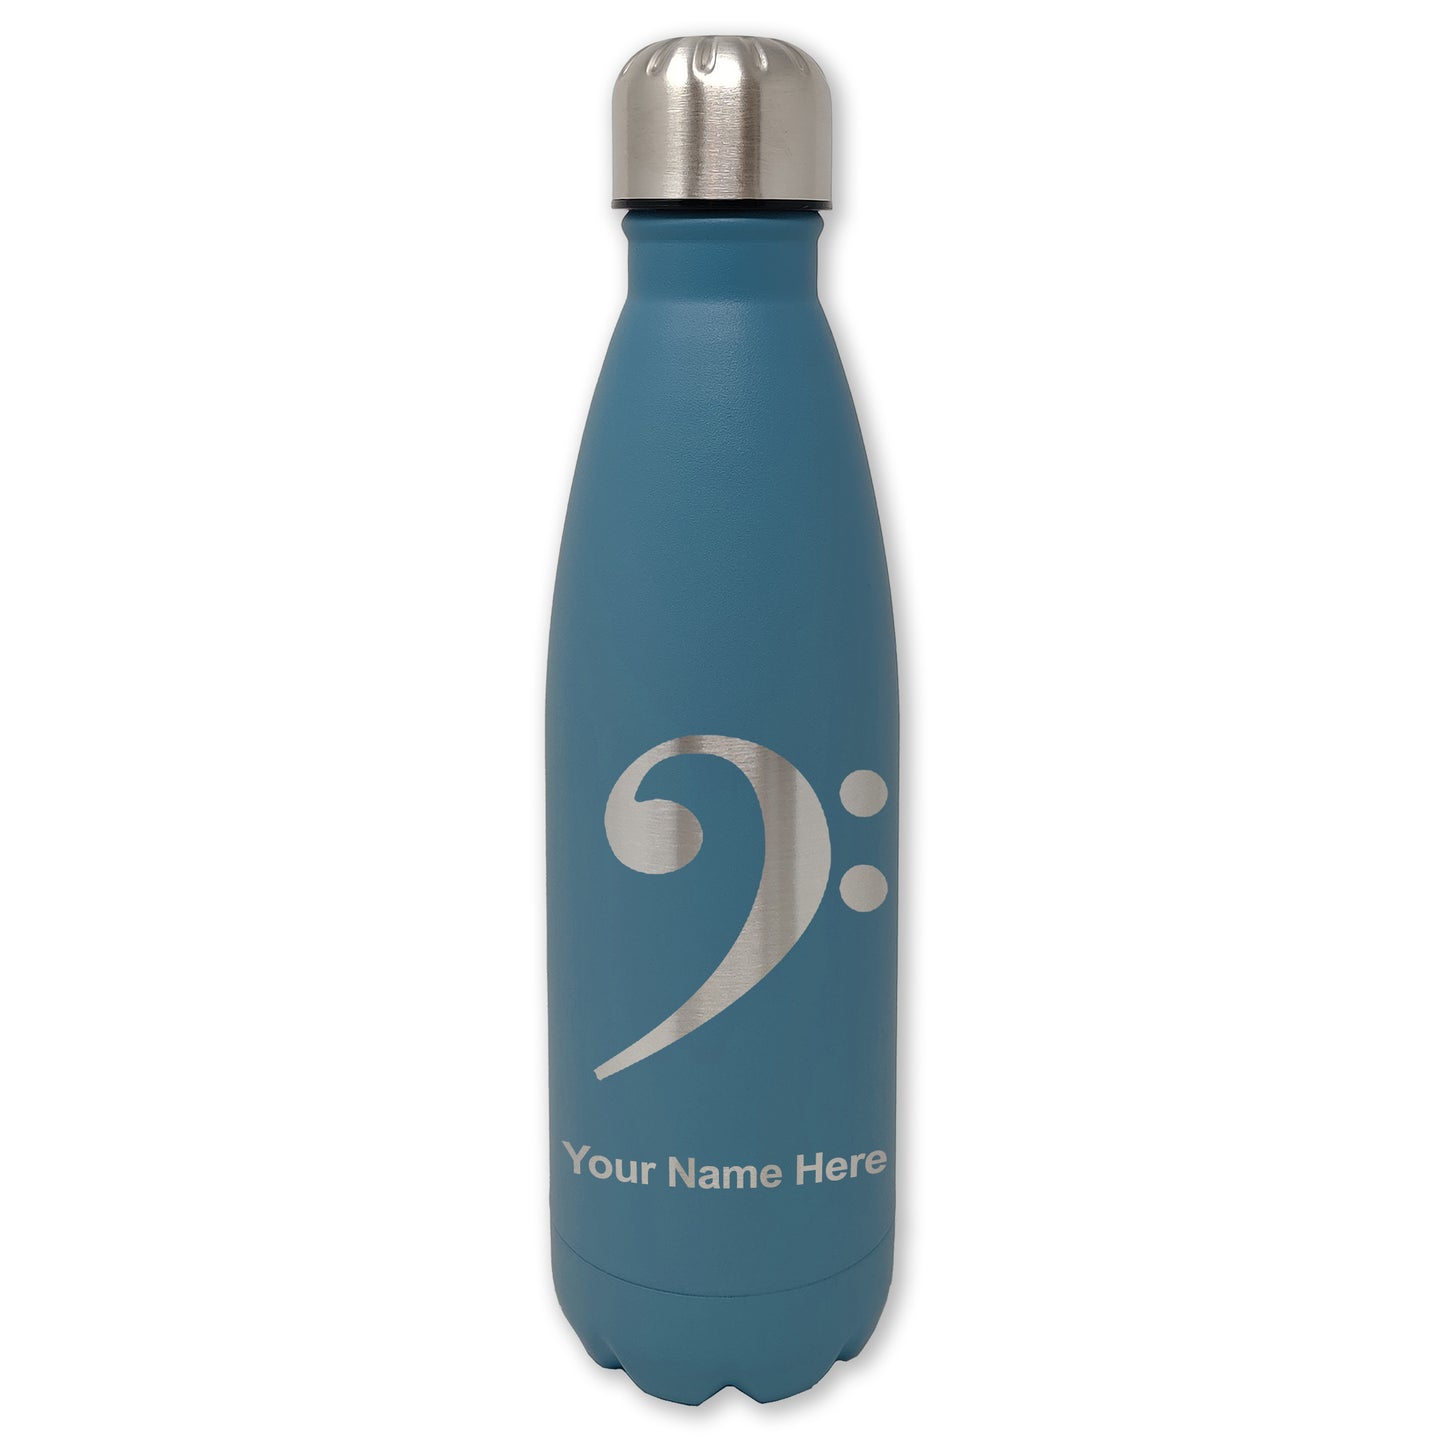 LaserGram Double Wall Water Bottle, Bass Clef, Personalized Engraving Included